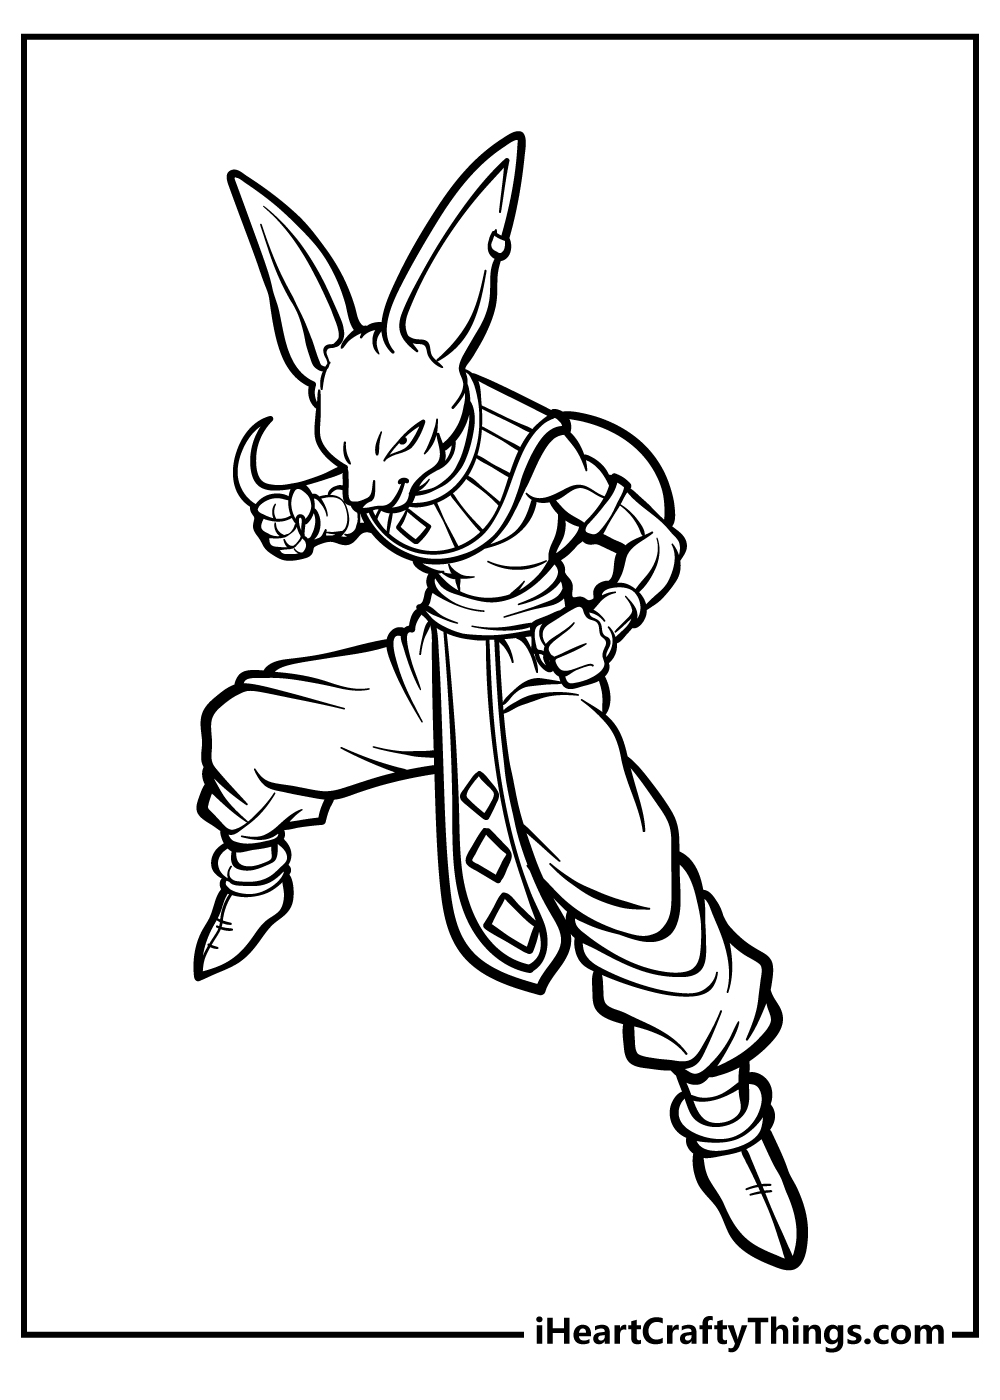 Drawing 6 from Dragon Ball Z coloring page